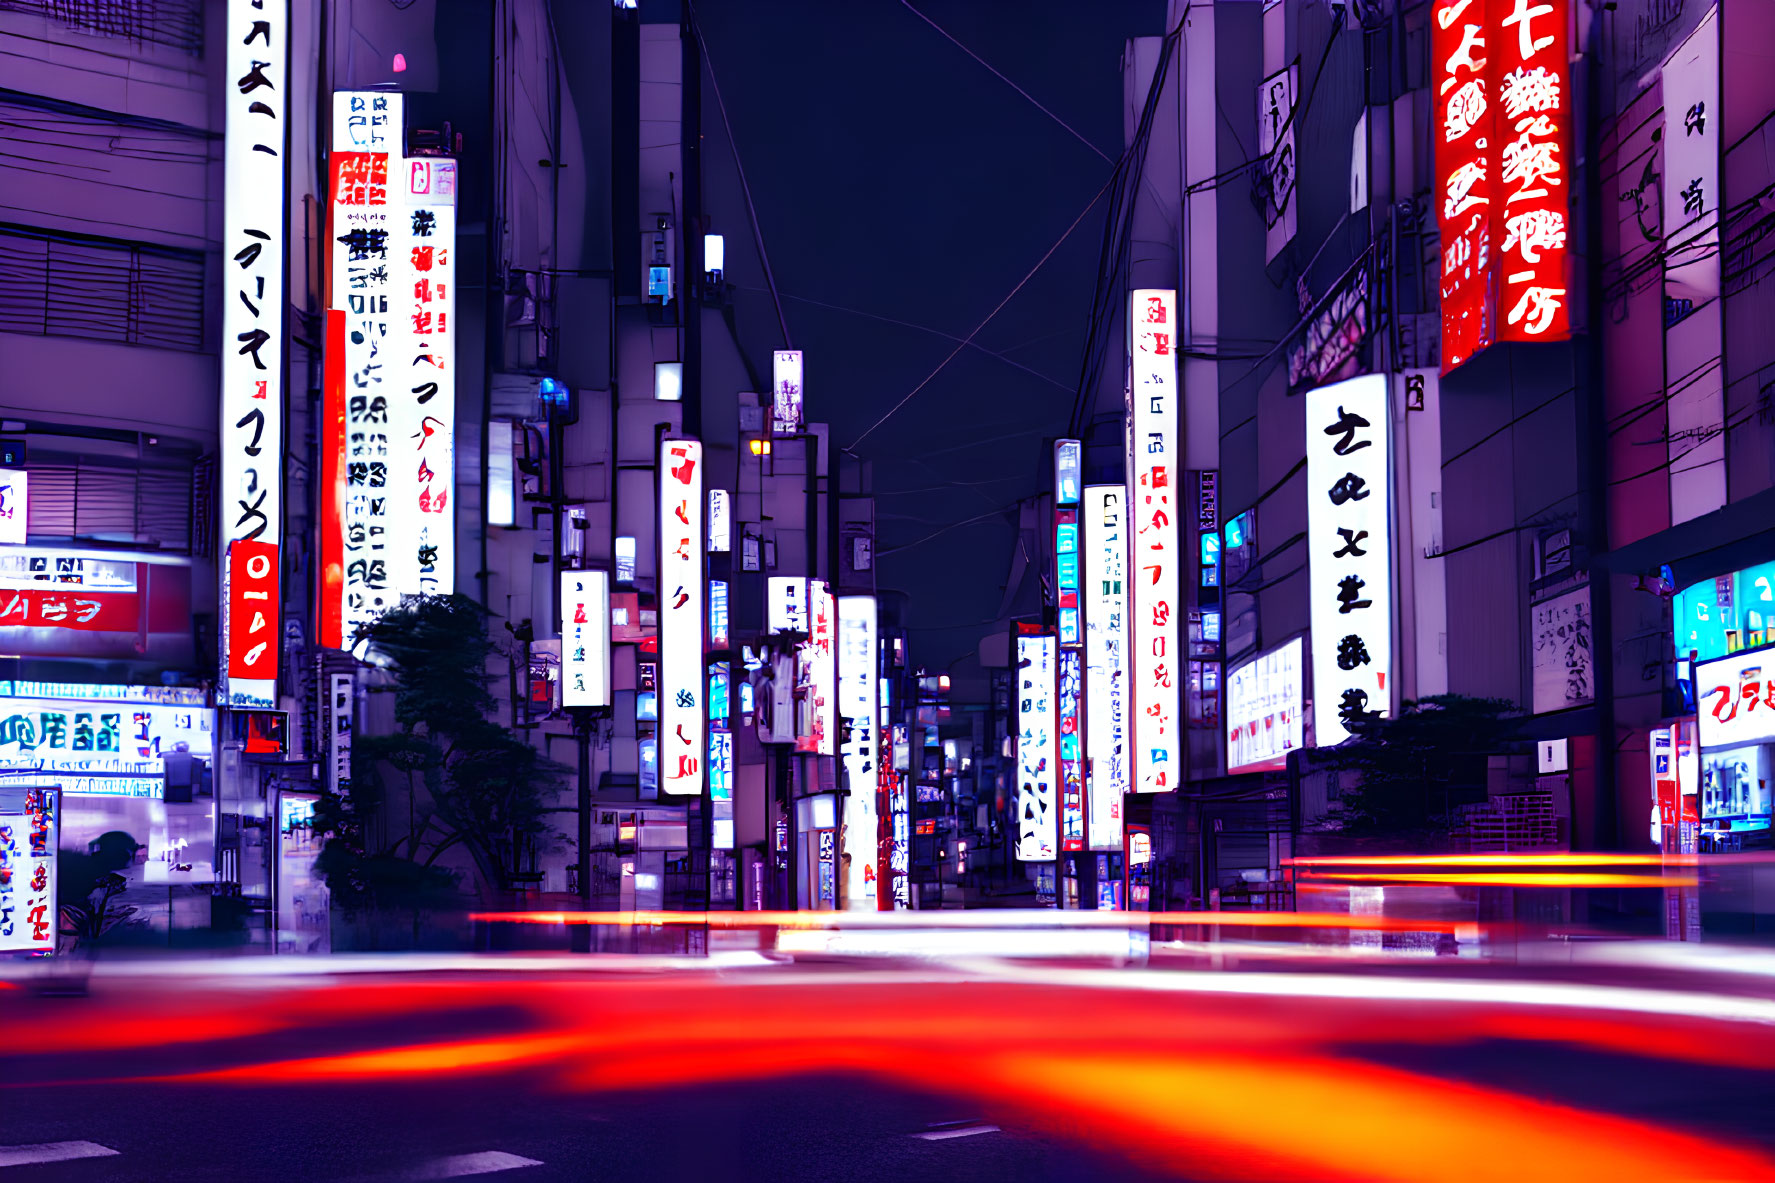 Vibrant Night Street with Japanese Neon Signs and Blurred Vehicle Lights